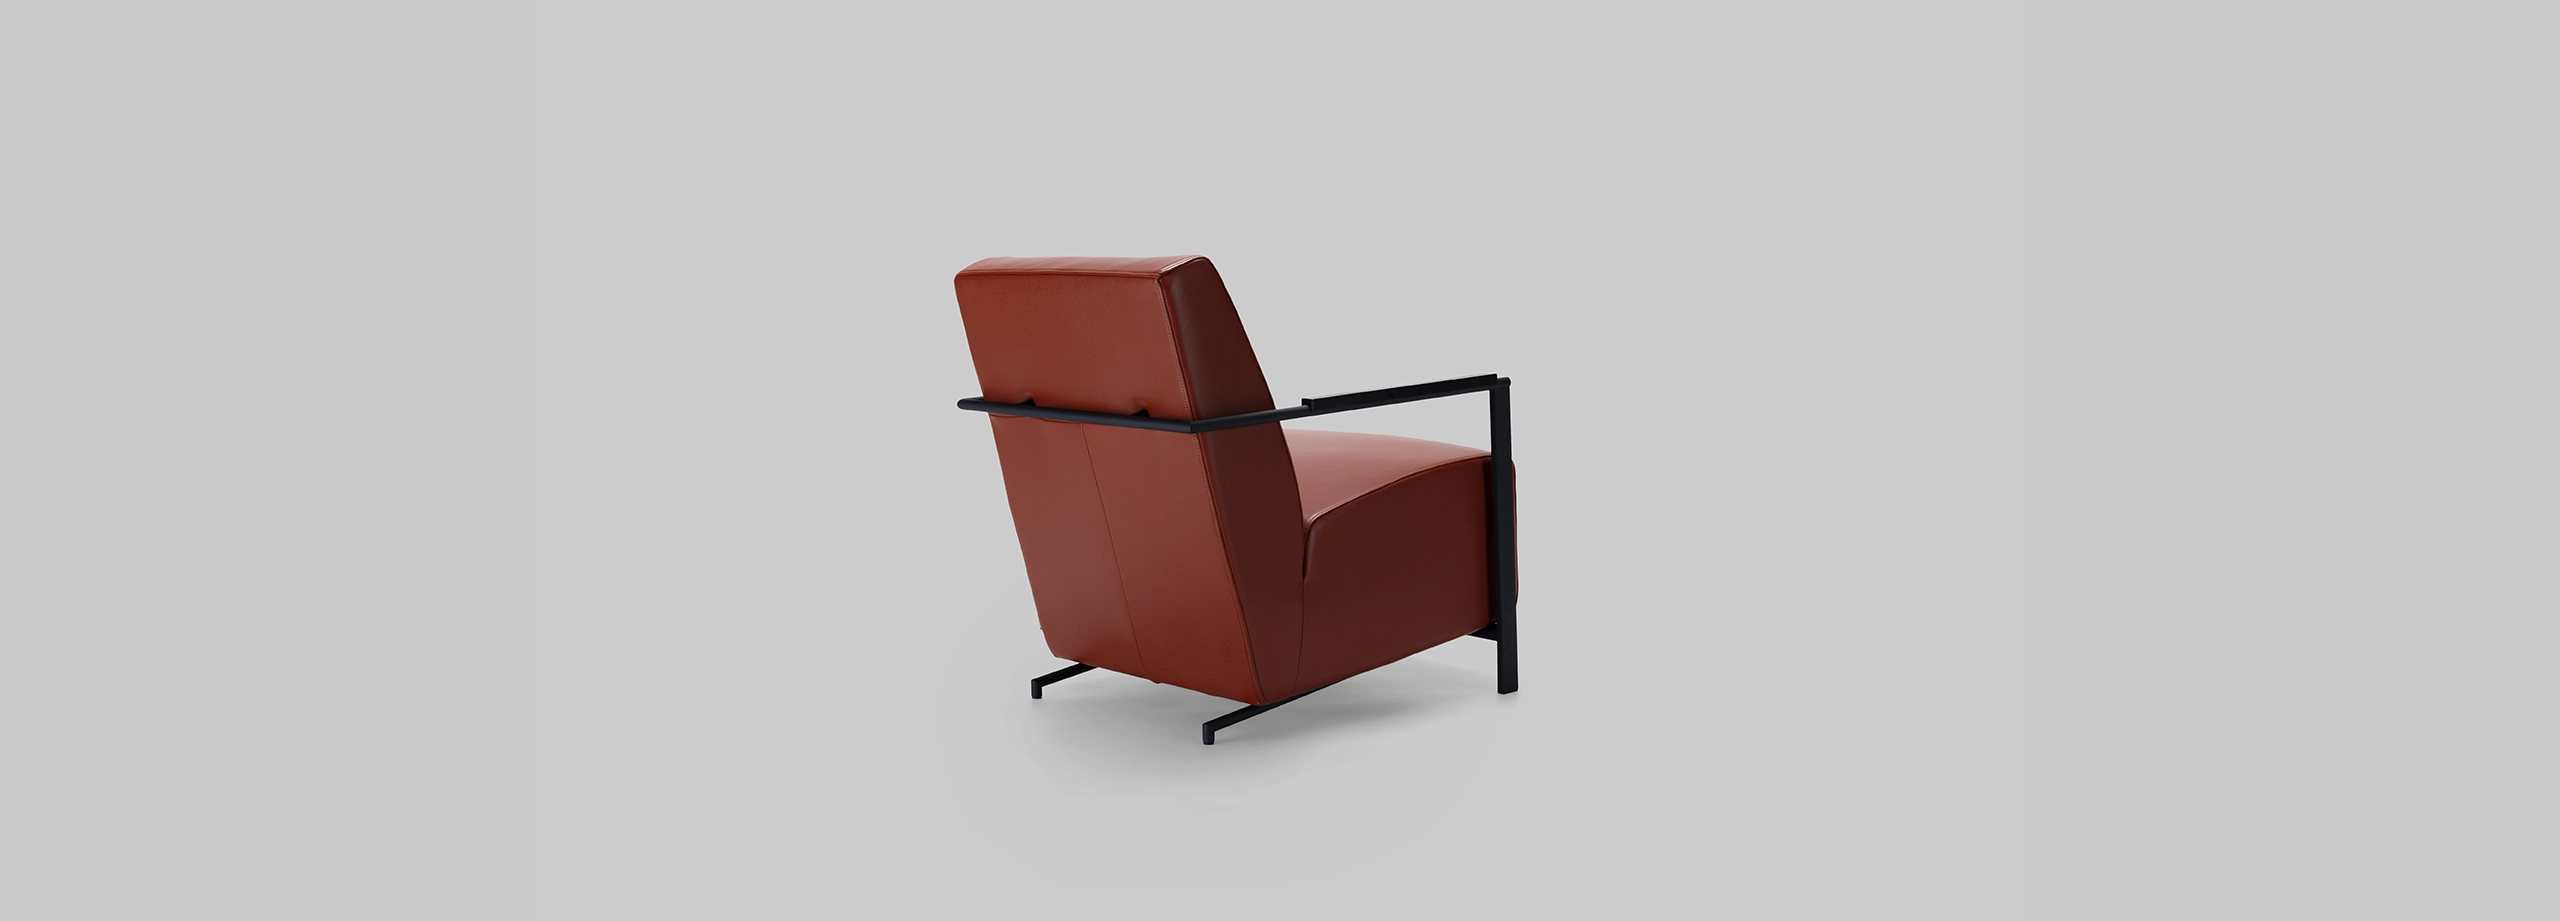 Harvink Alowa fauteuil leder club whiskey